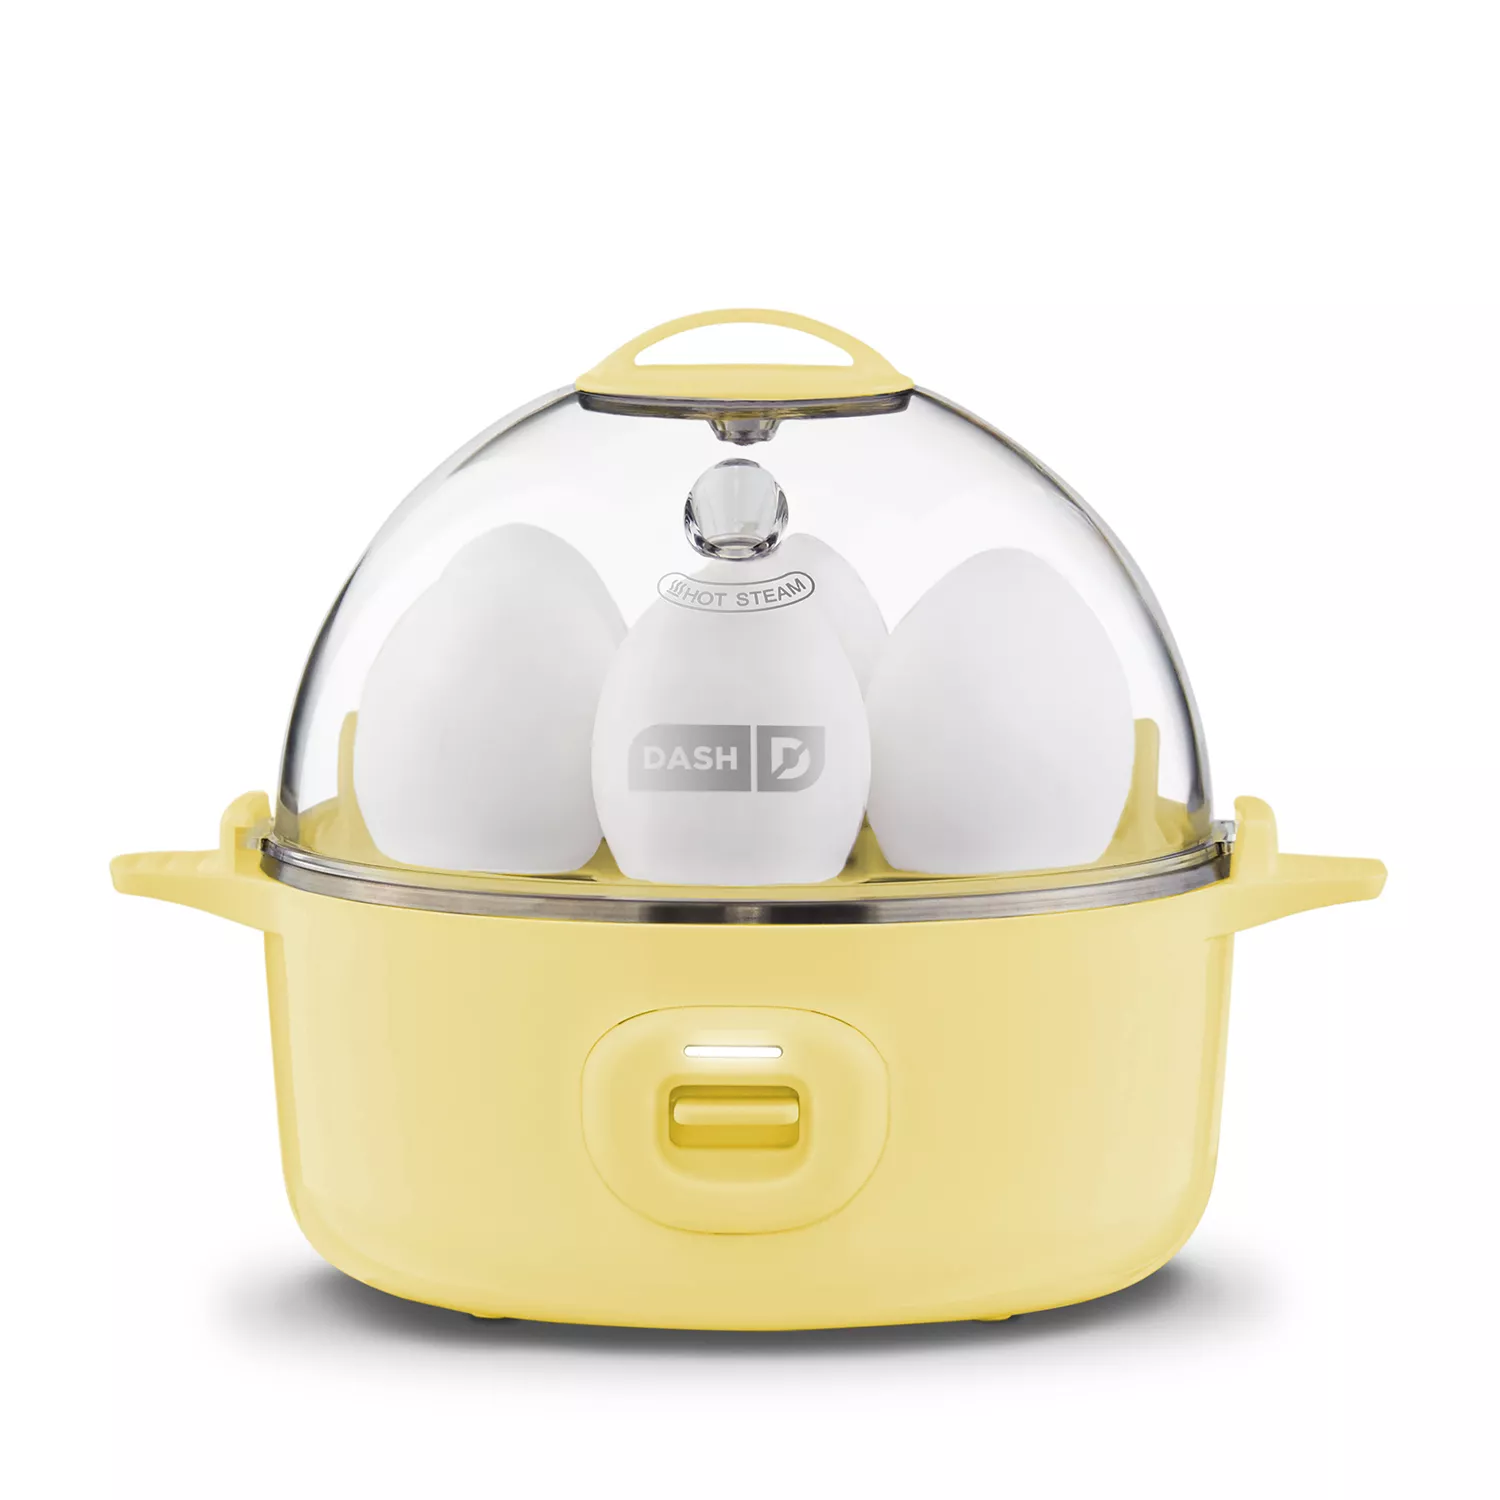 DASH Express Electric Egg Cooker, Yellow